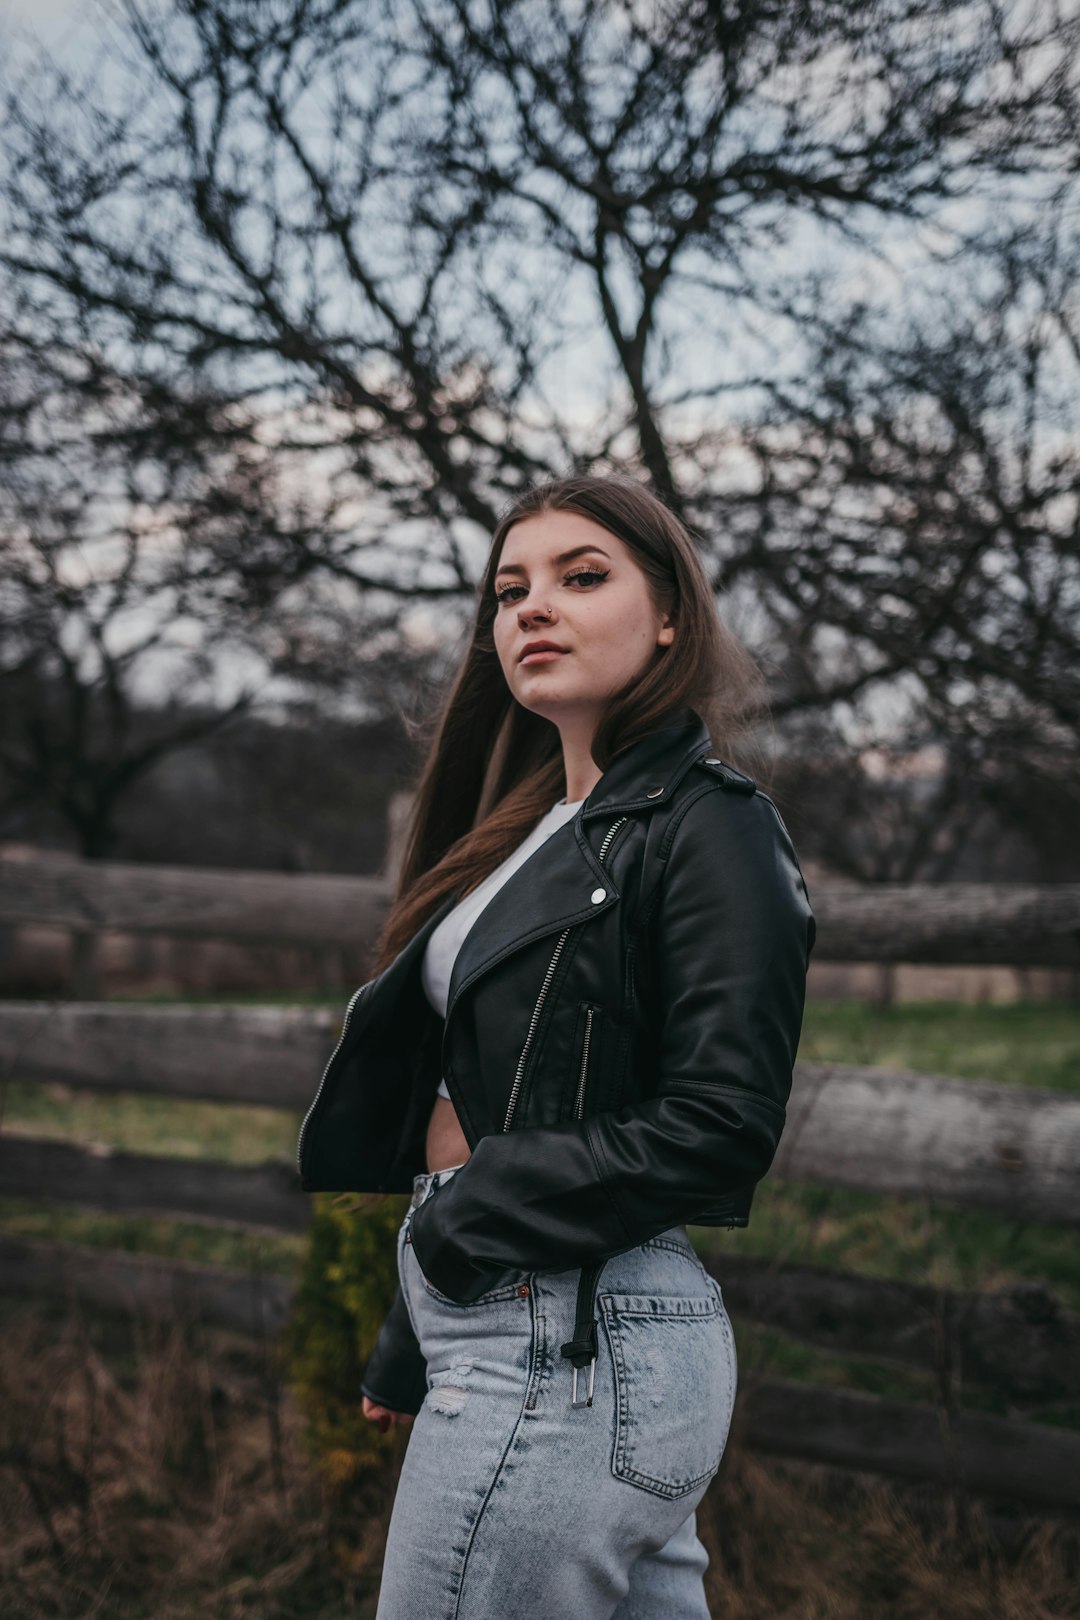 woman in black leather jacket standing near bare trees during daytime